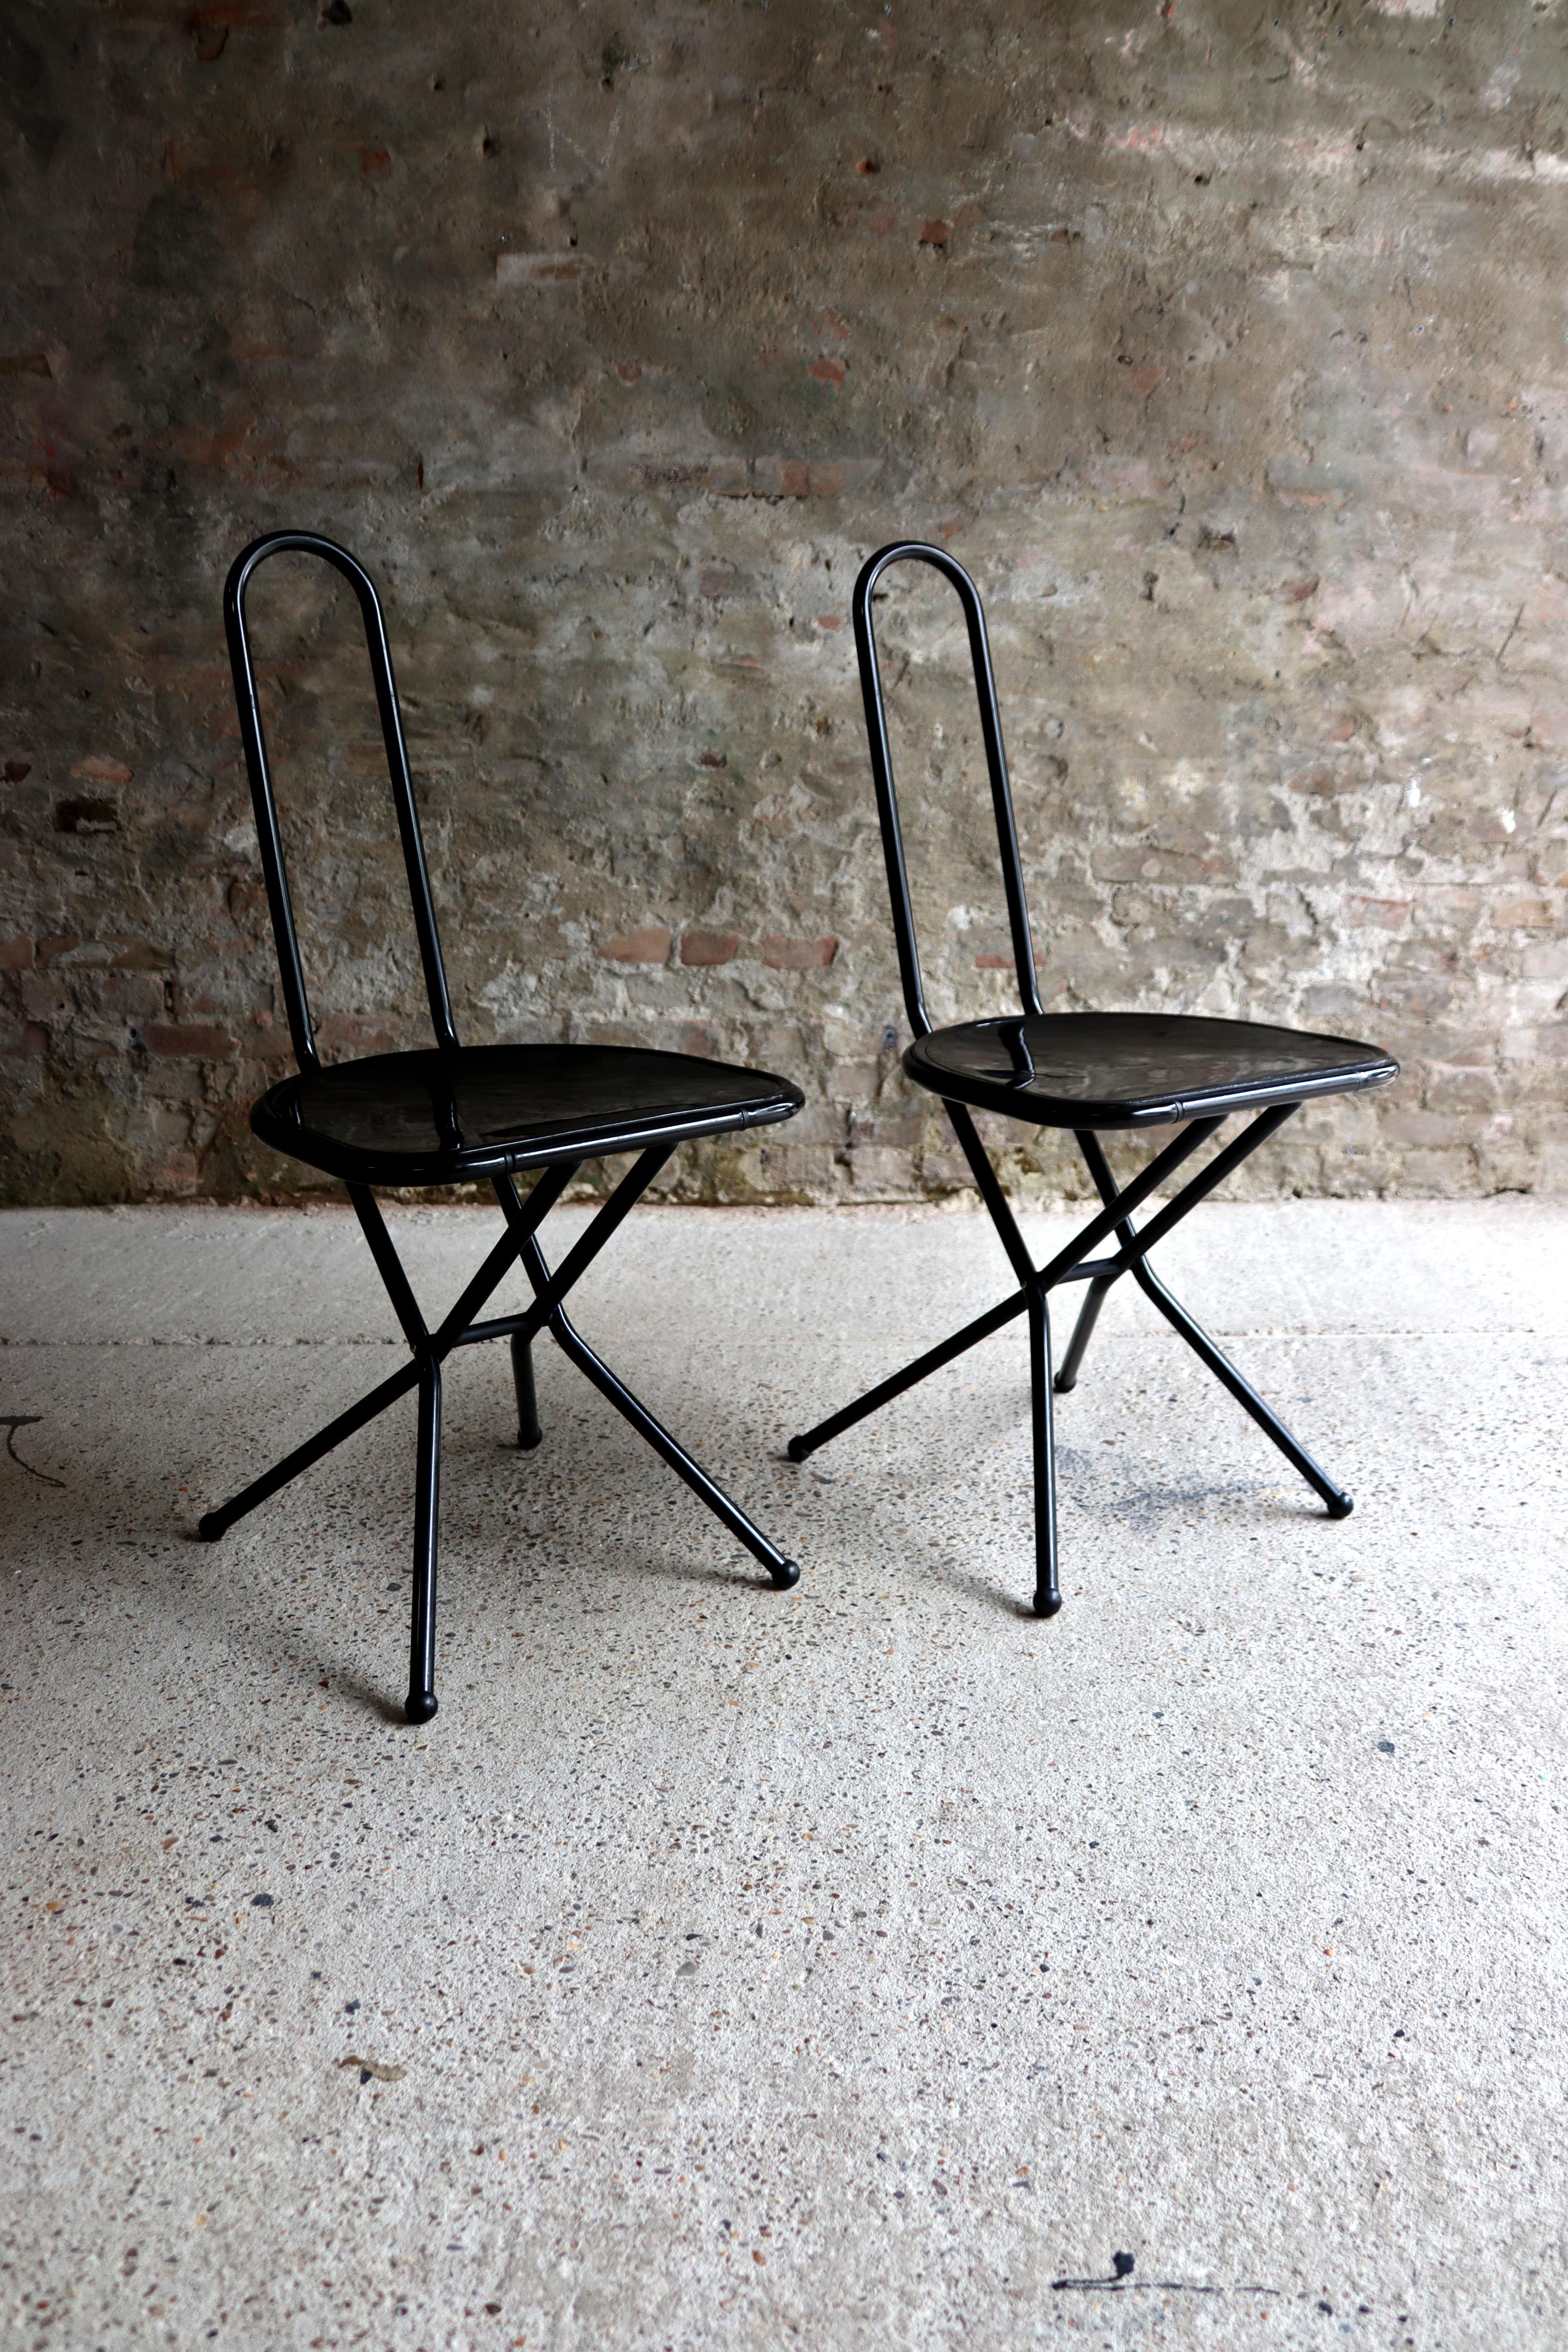 This folding chair is called Isak and is designed by Niels Gammelgaard for IKEA. It was first listed in the 1989 catalogue. Made in Italy. It has a black metal structure and black plexiglass seat. Isak chairs in this combination are really rare.